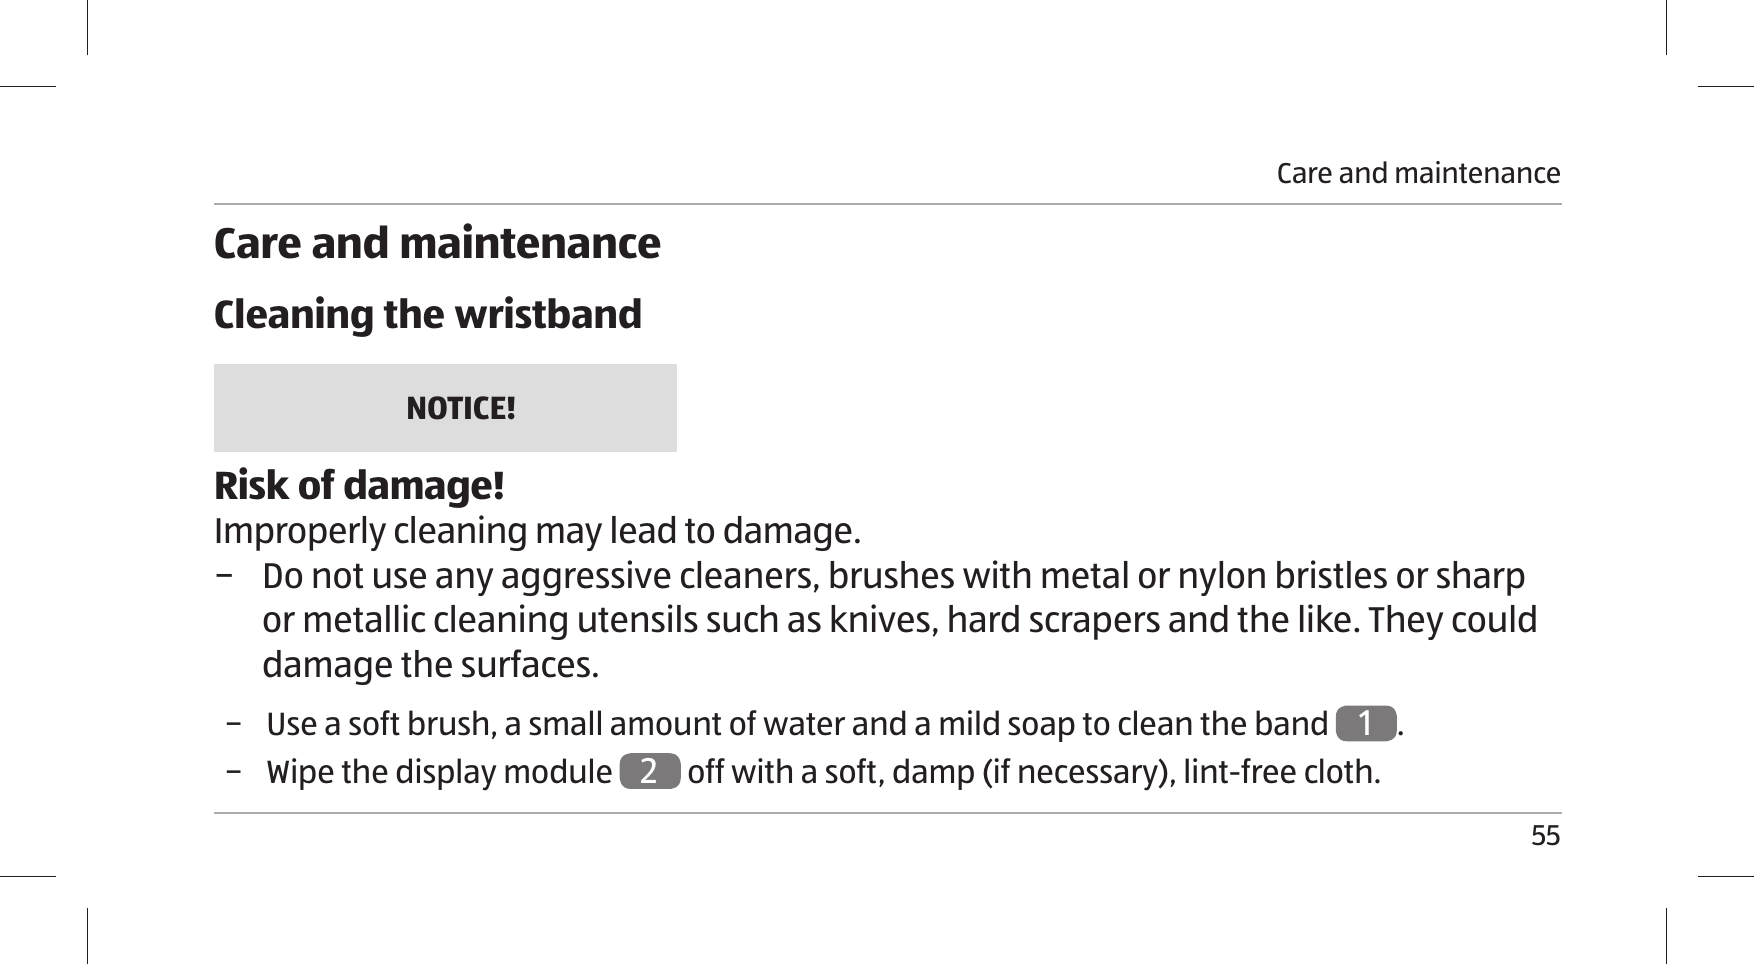 Care and maintenance55Care and maintenanceCleaning the wristbandNOTICE!Risk of damage!Improperly cleaning may lead to damage.  − Do not use any aggressive cleaners, brushes with metal or nylon bristles or sharp or metallic cleaning utensils such as knives, hard scrapers and the like. They could damage the surfaces. − Use a soft brush, a small amount of water and a mild soap to clean the band 1. − Wipe the display module 2 off with a soft, damp (if necessary), lint-free cloth.